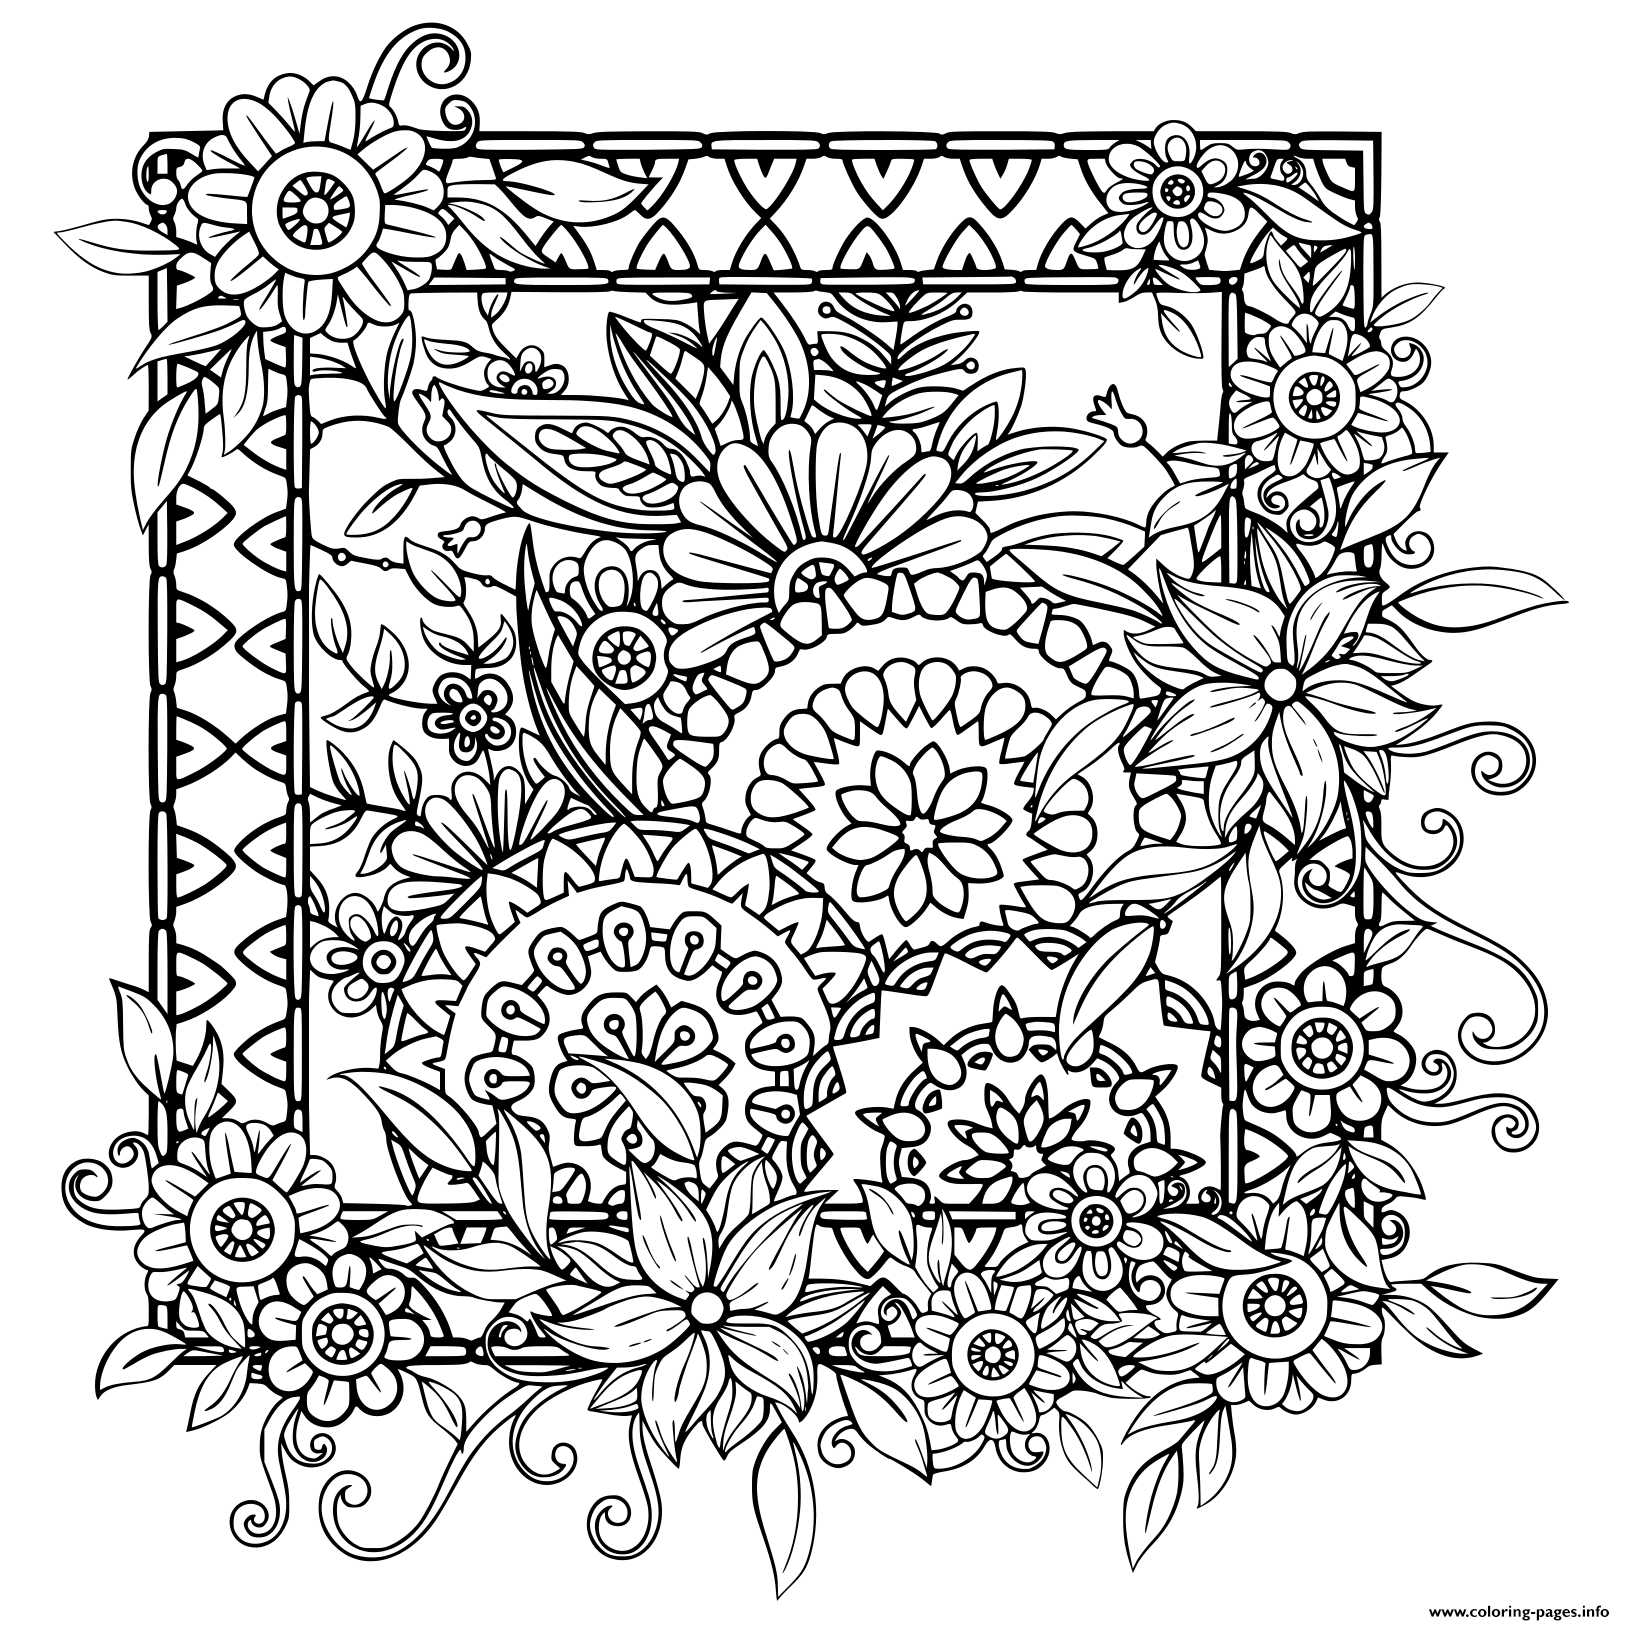 Adult With Flowers Pattern Black And White Doodle Wreath Floral Mandala Bouquet Line coloring